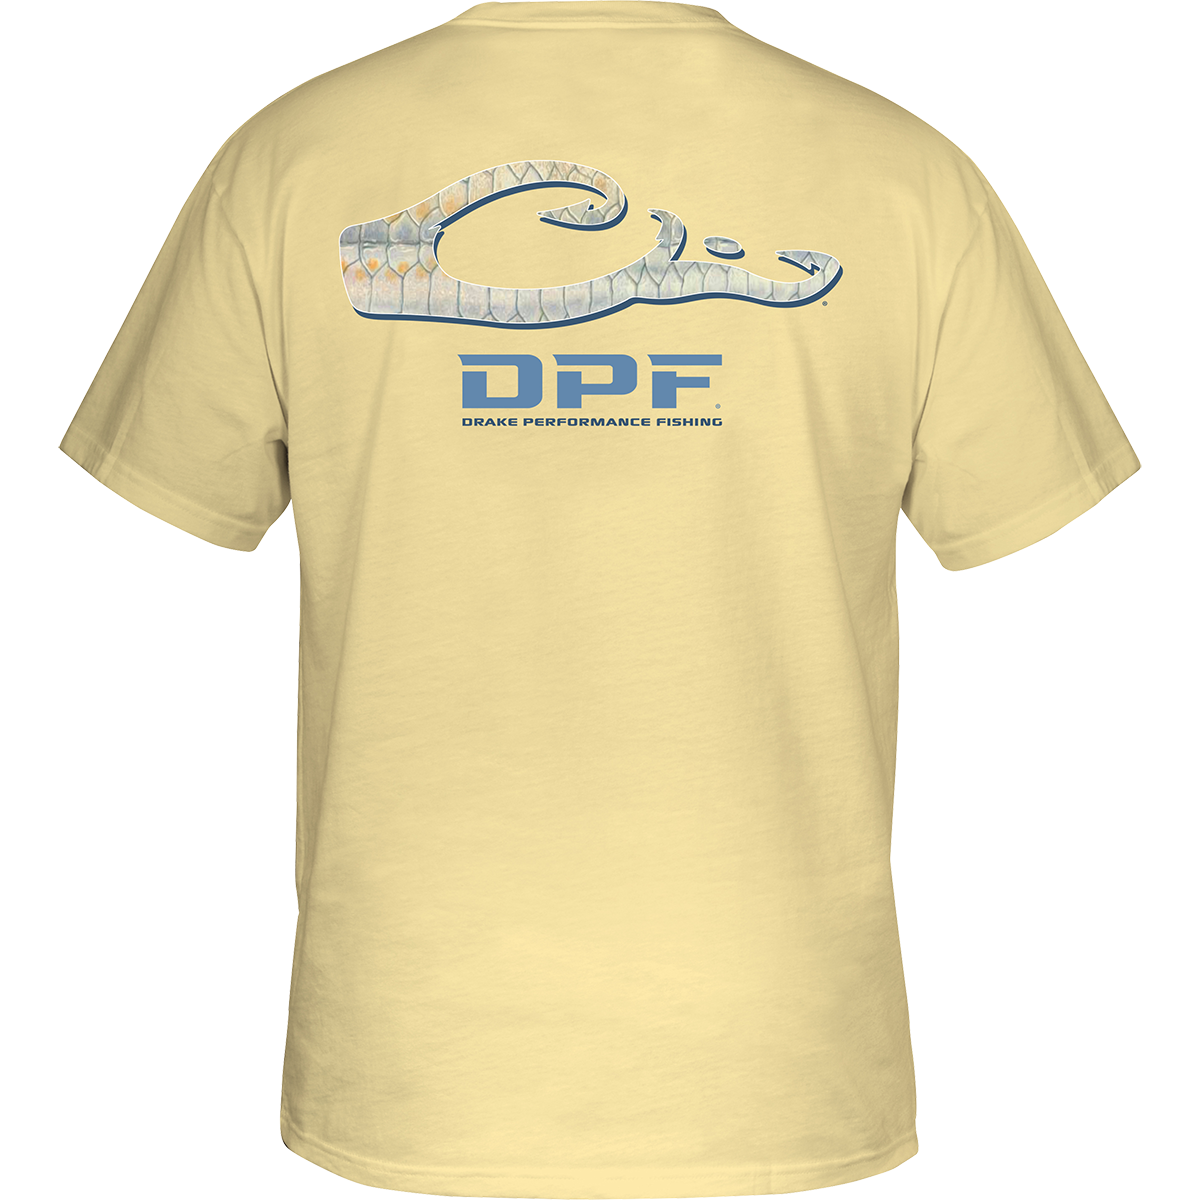 tarpon shirt products for sale